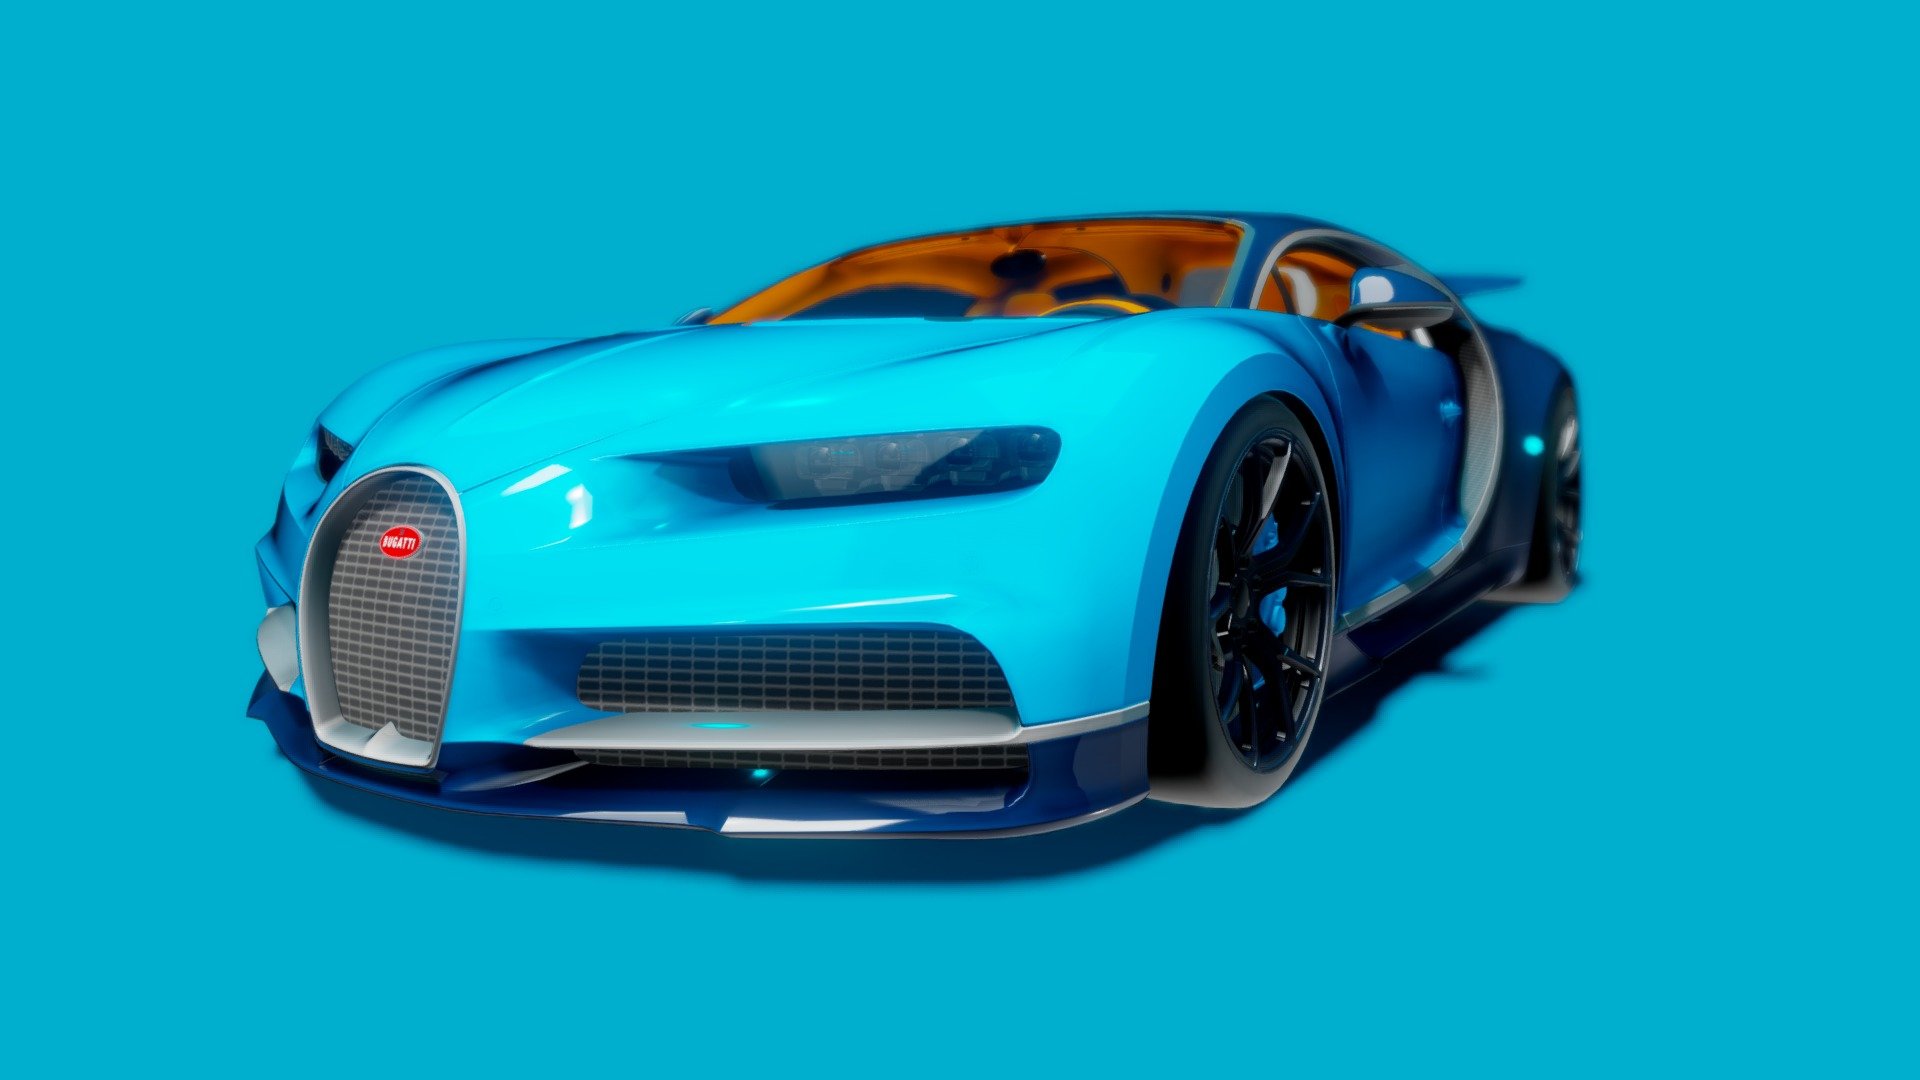 The Bugatti Chiron is a hypercar from the French automobile manufacturer Bugatti, the announced descendant of the Bugatti Veyron 16.42. It takes its name from the Monegasque racing driver Louis Chiron (1899-1979)3. It is prefigured by the Bugatti Vision Gran Turismo concept car and inspired by the Bugatti Type 57 3d model